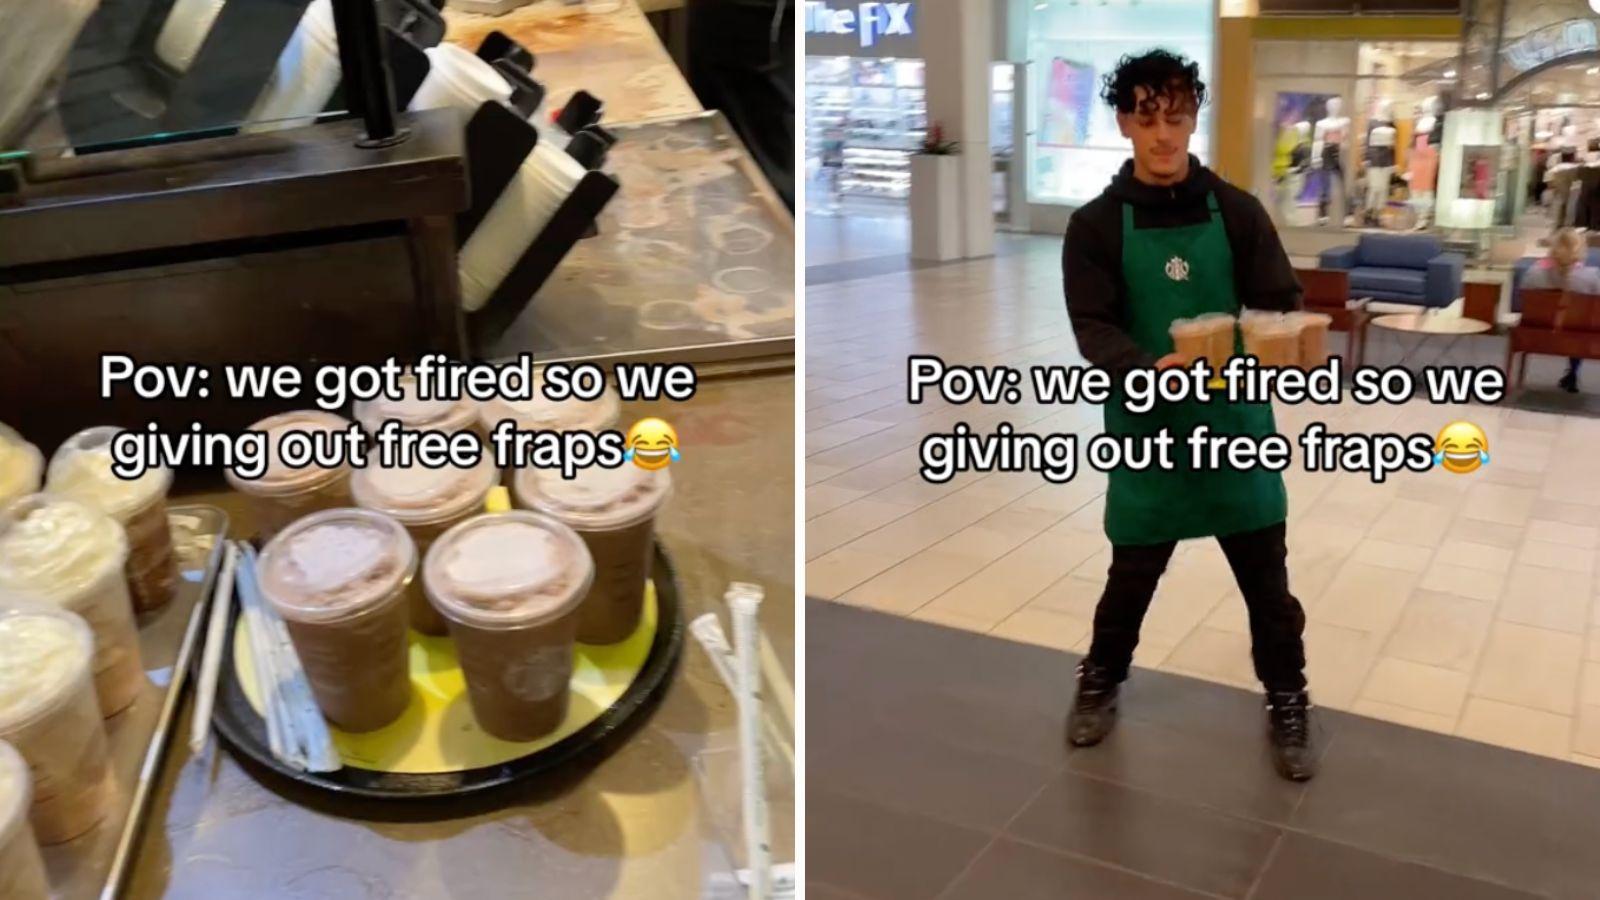 Starbucks workers give out free drinks to customers after getting fired